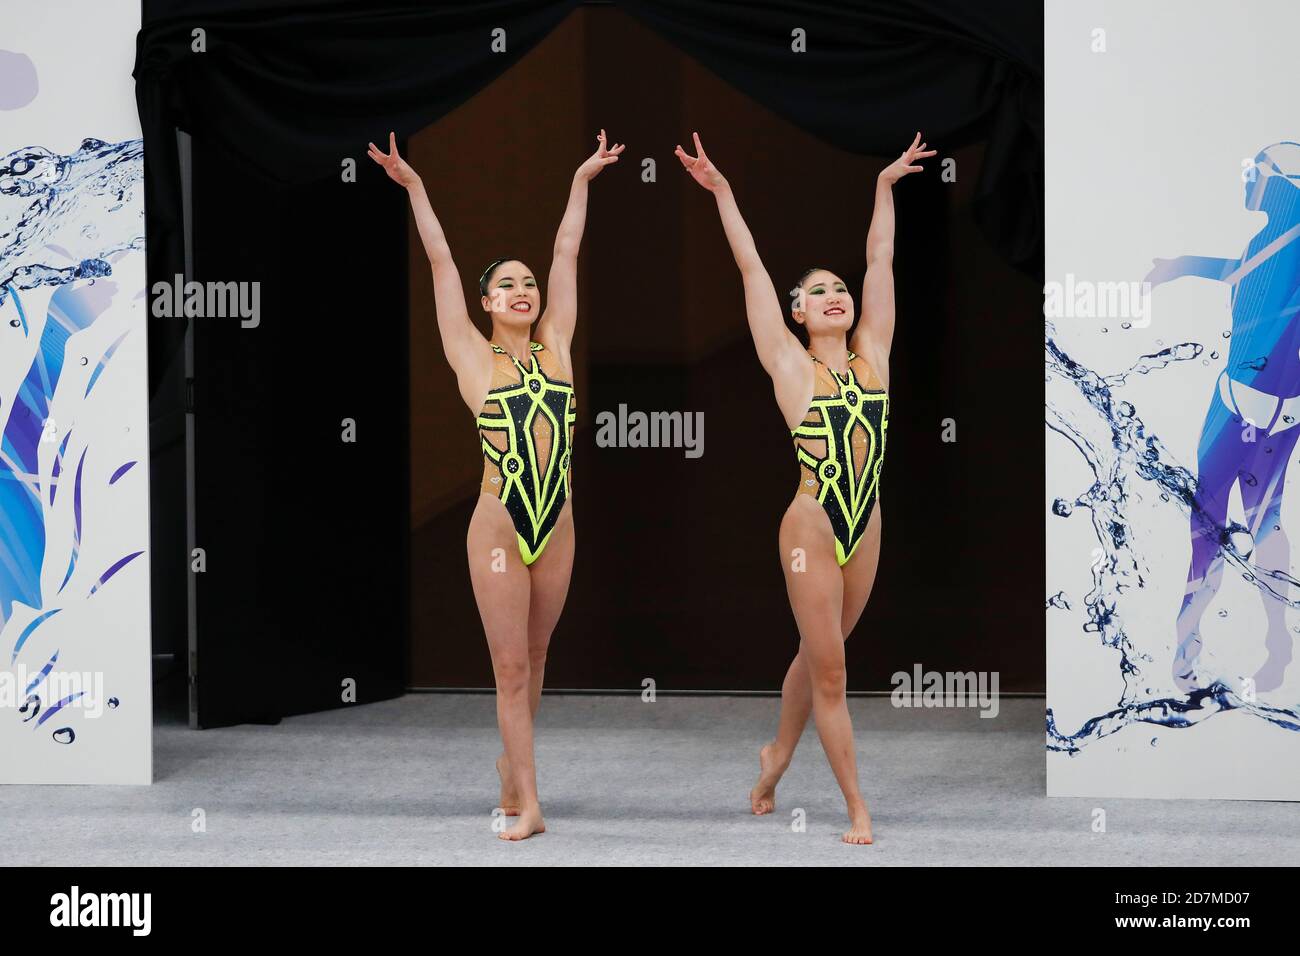 Tokyo, Japan. 24th Oct, 2020. Japanese artistic swimmers Inui Yukiko and Megumi Yoshida perform during the grand opening ceremony for the Tokyo Aquatics Centre. The venue will host Tokyo 2020 Olympic and Paralympic Games' swimming, diving and artistic swimming competitions next summer. Credit: Rodrigo Reyes Marin/ZUMA Wire/Alamy Live News Stock Photo